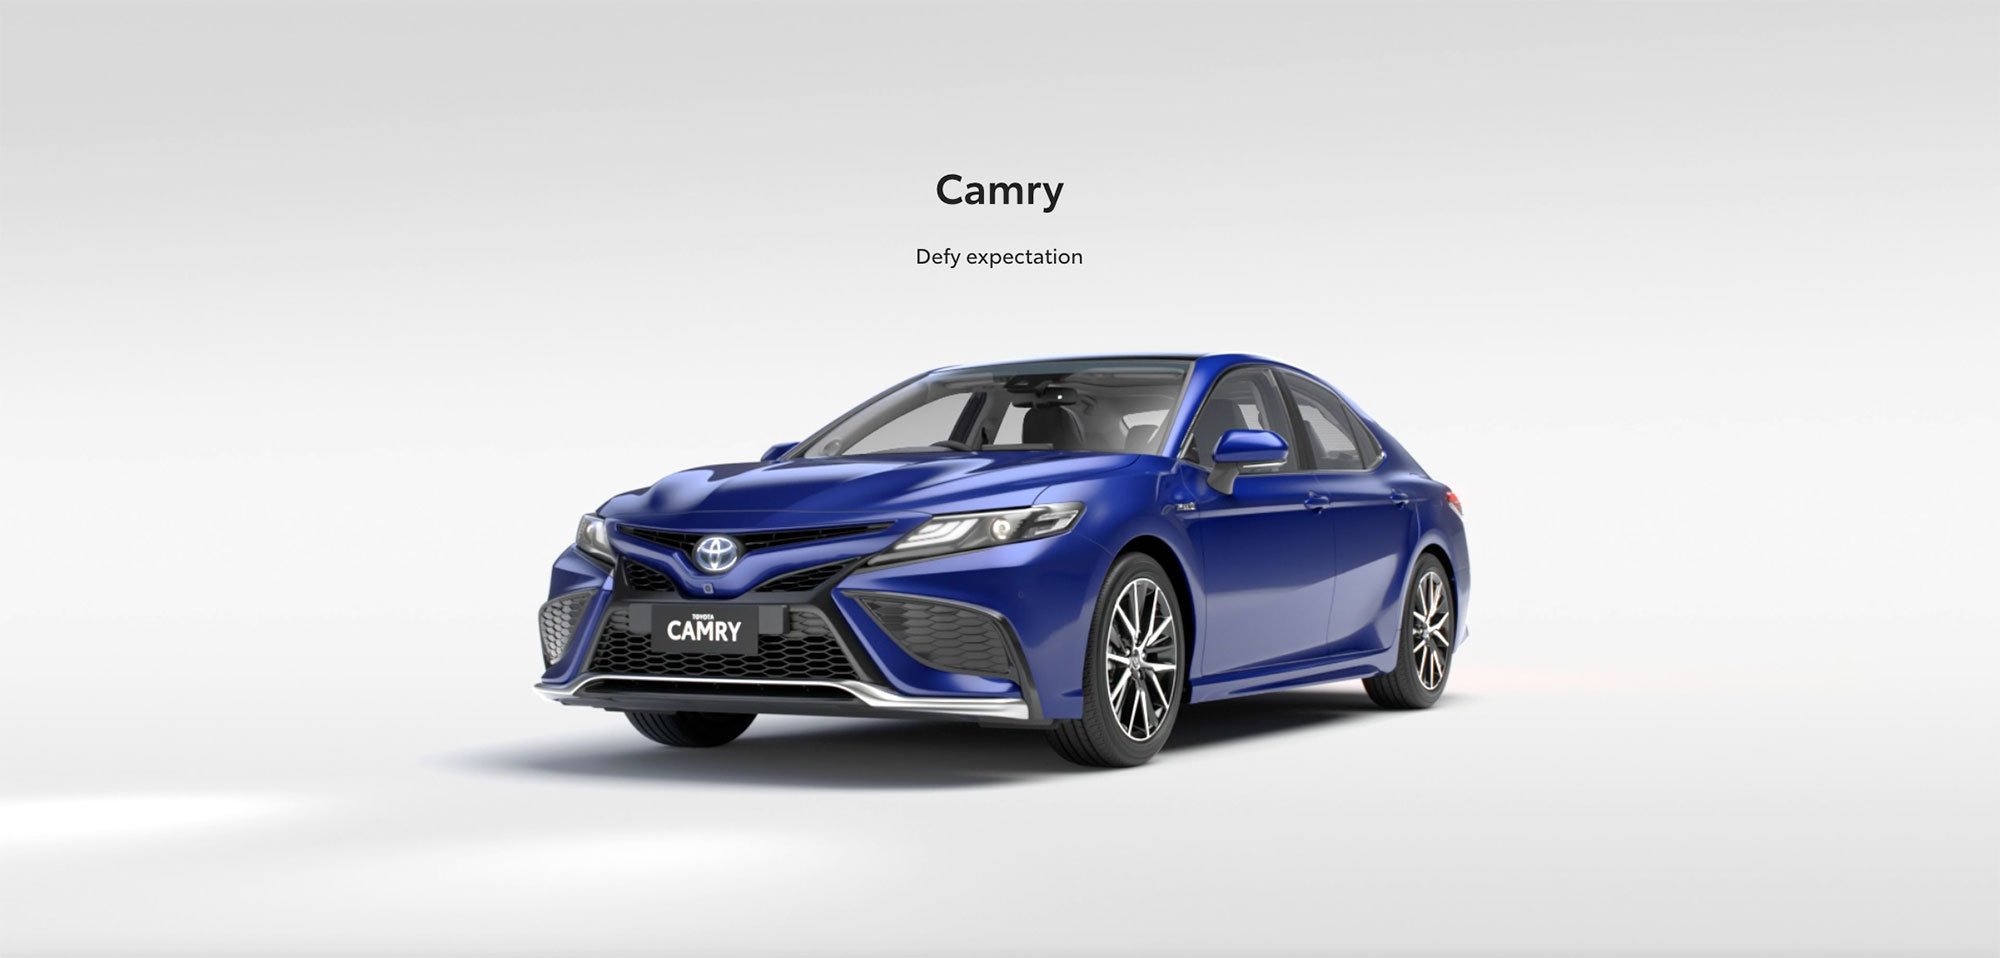 New-Look Camry